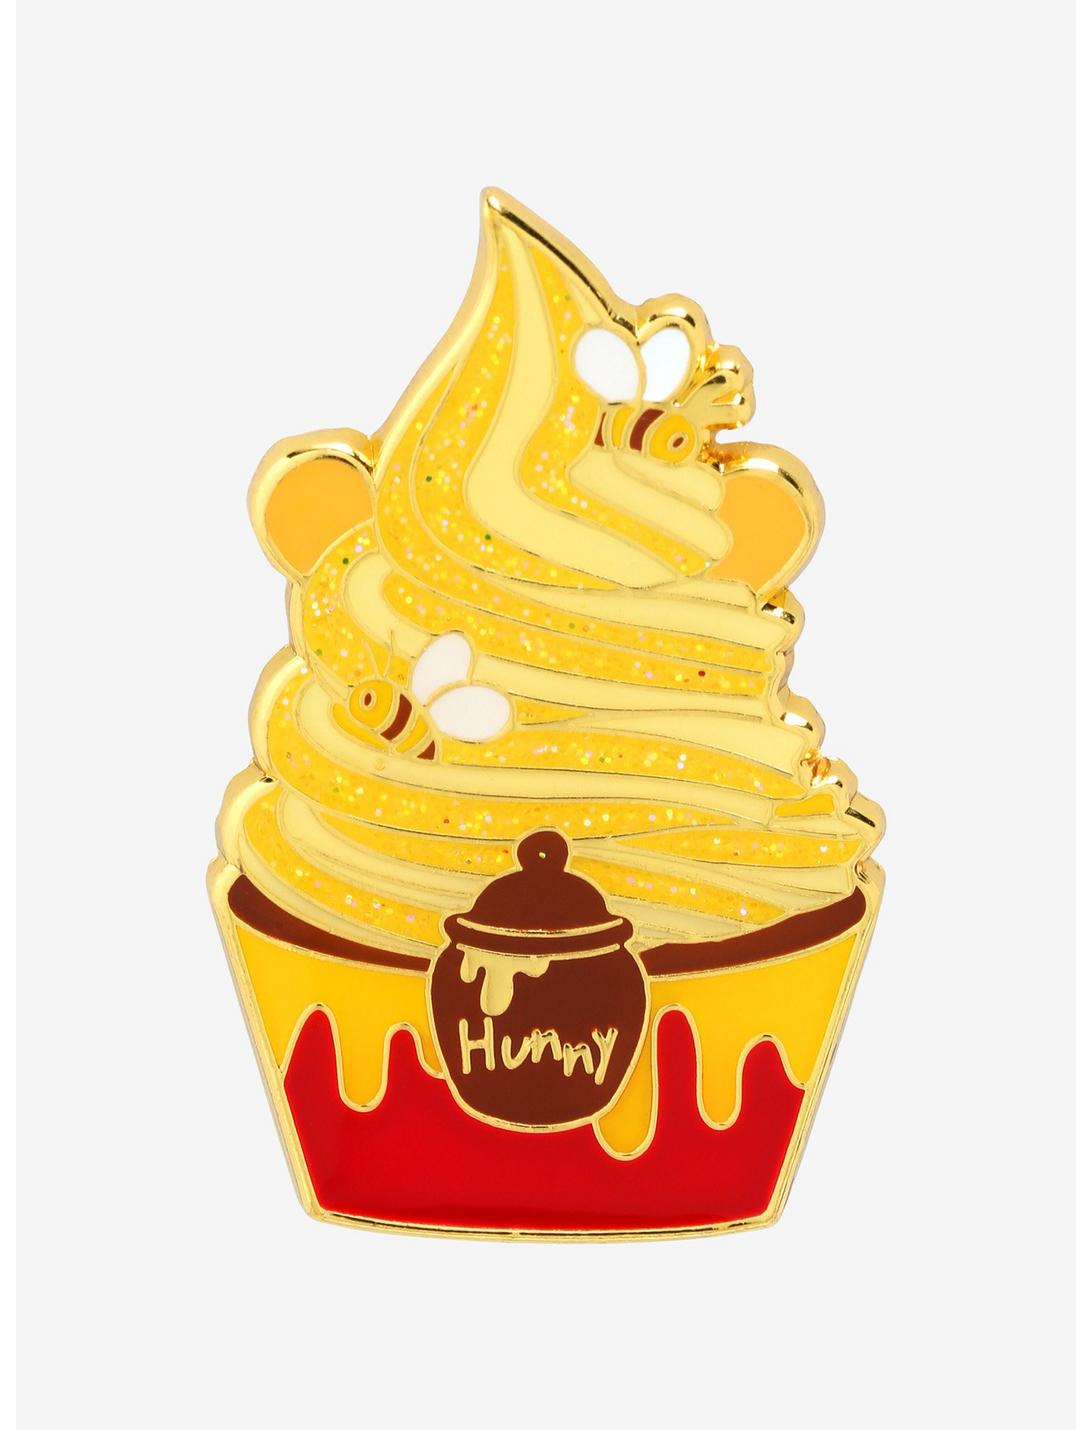 Loungefly Disney Winnie the Pooh Soft Serve Treat Enamel Pin - BoxLunch Exclusive, , hi-res